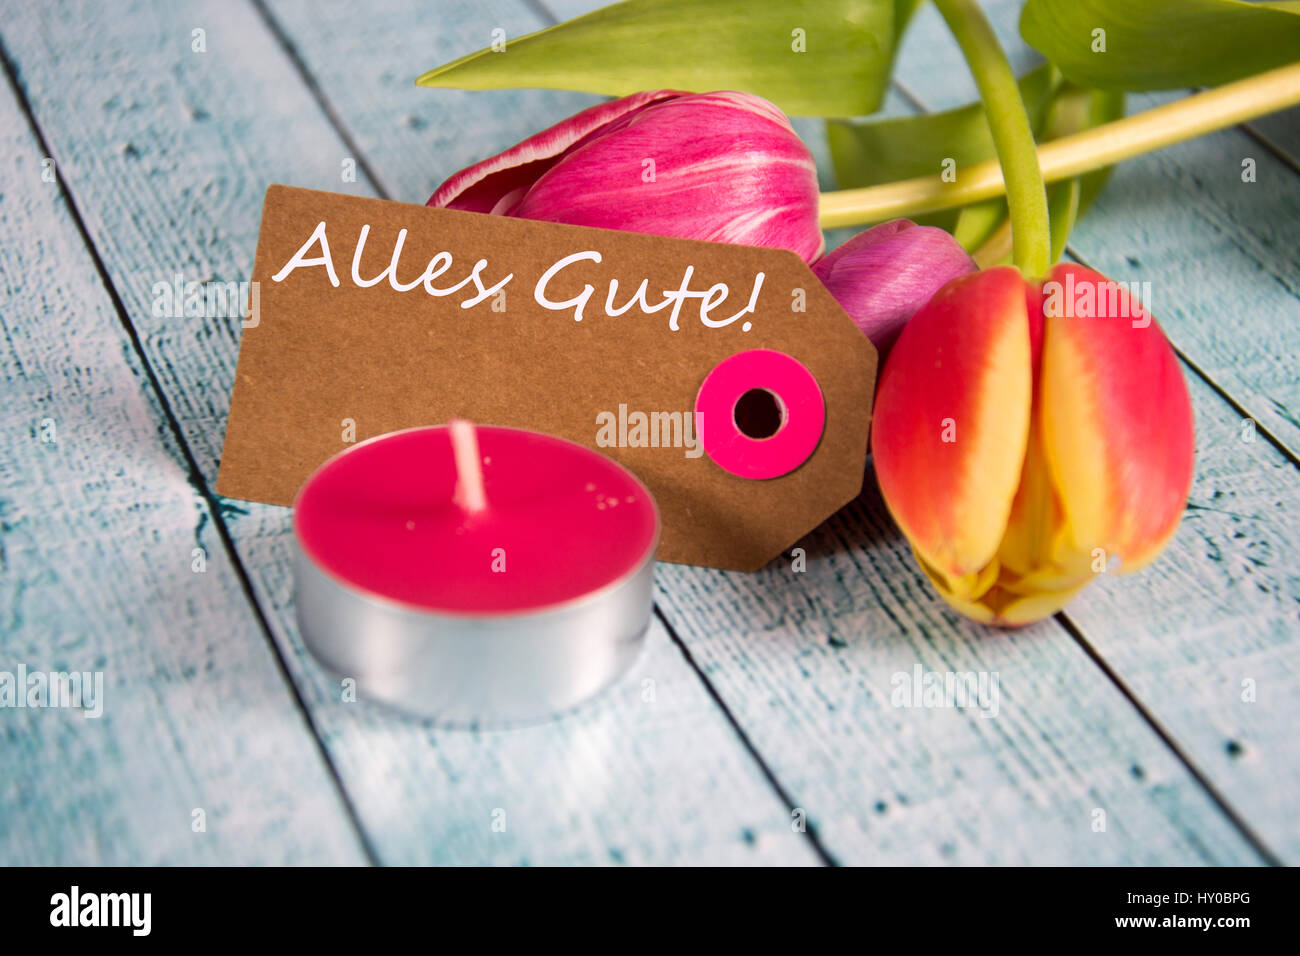 Alles Gute ! inscription written on paper tag Stock Photo